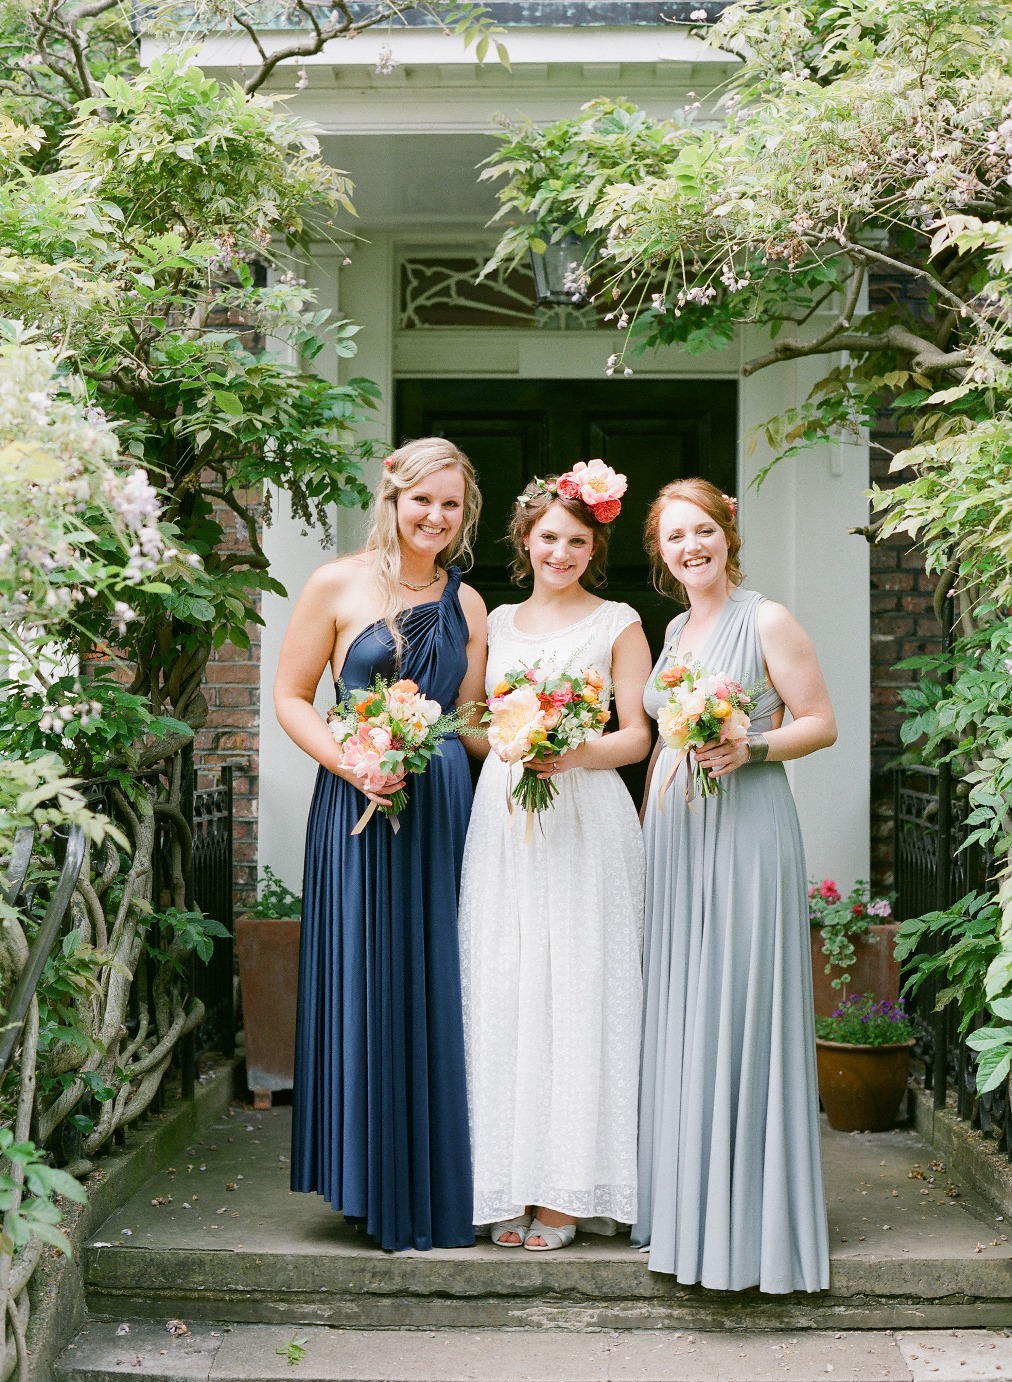 Bride & Bridesmaids - A 1940s Wedding Dress for a Sweet Early Summer Wedding from Taylor & Porter Photography